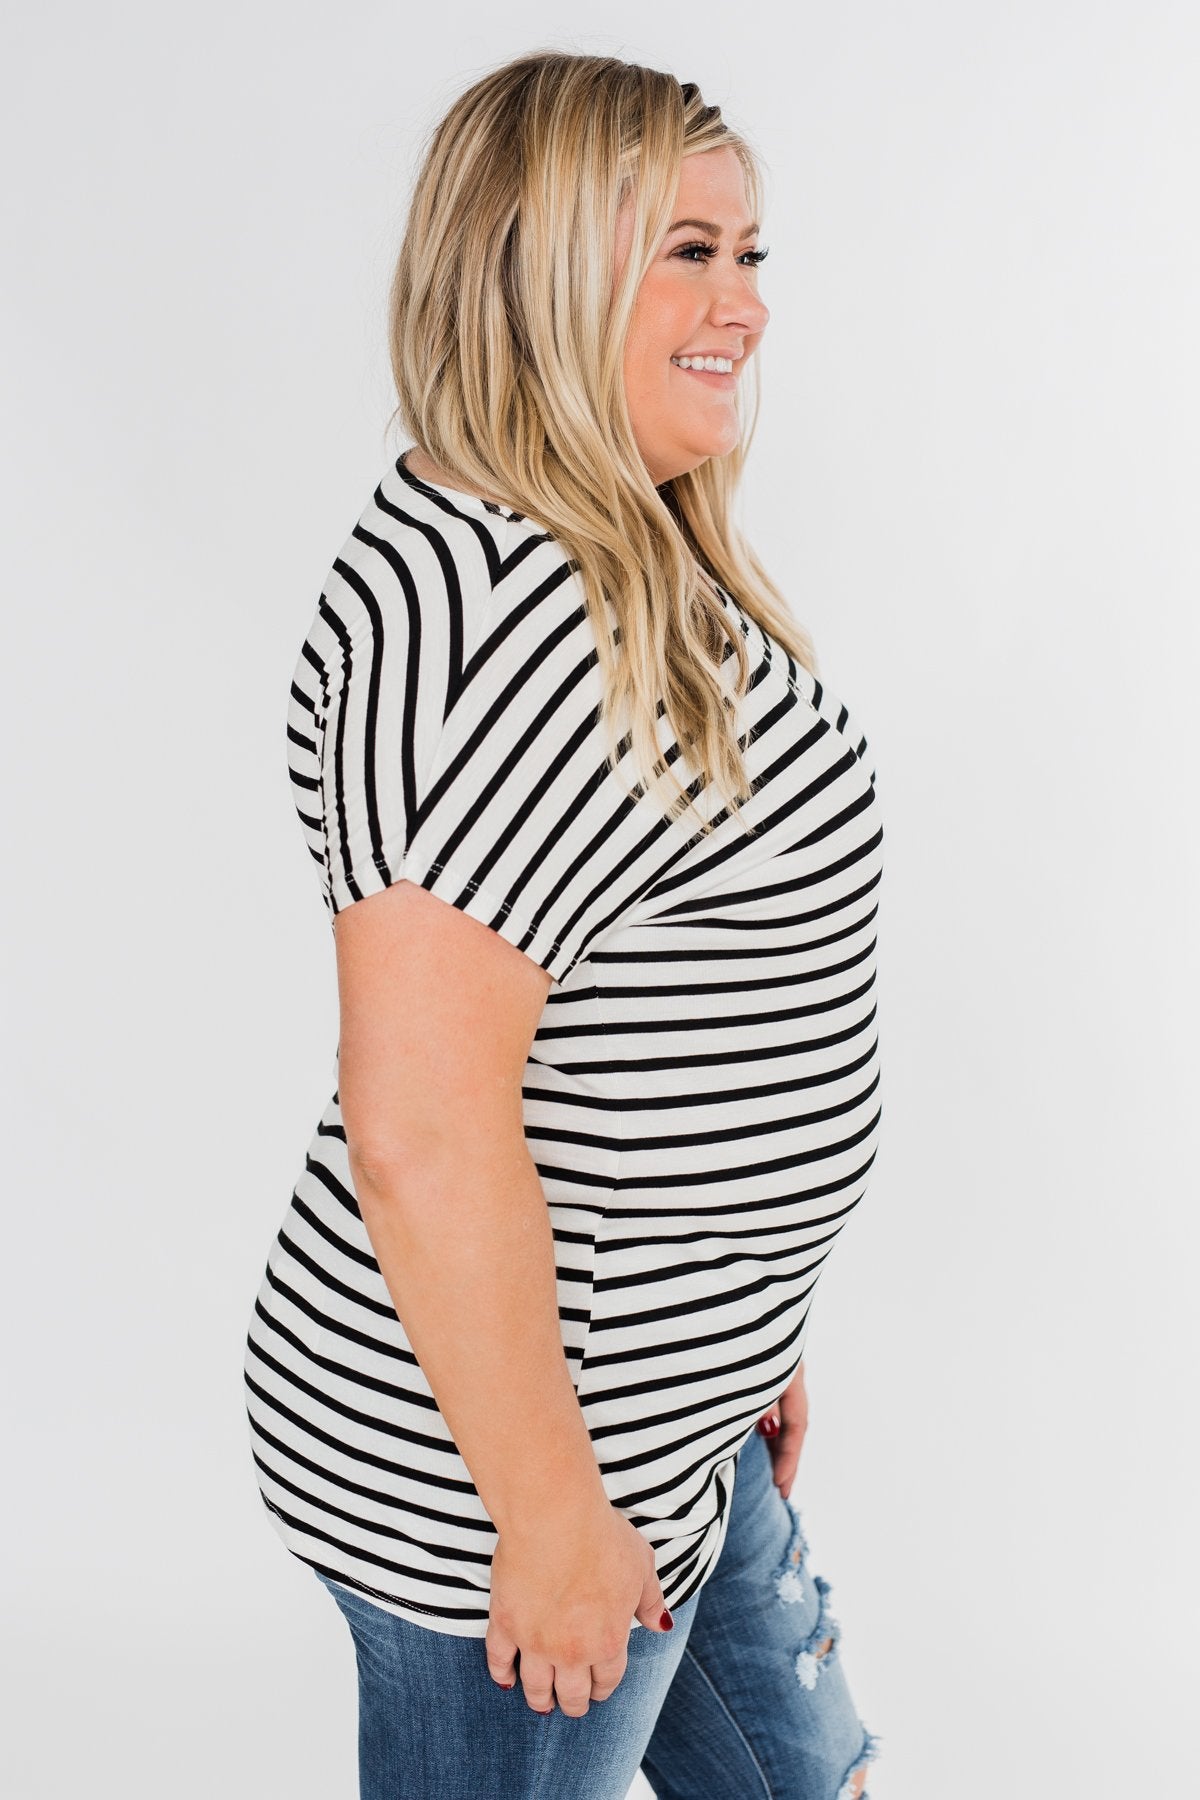 Hold That Thought Striped Top - Black & Ivory